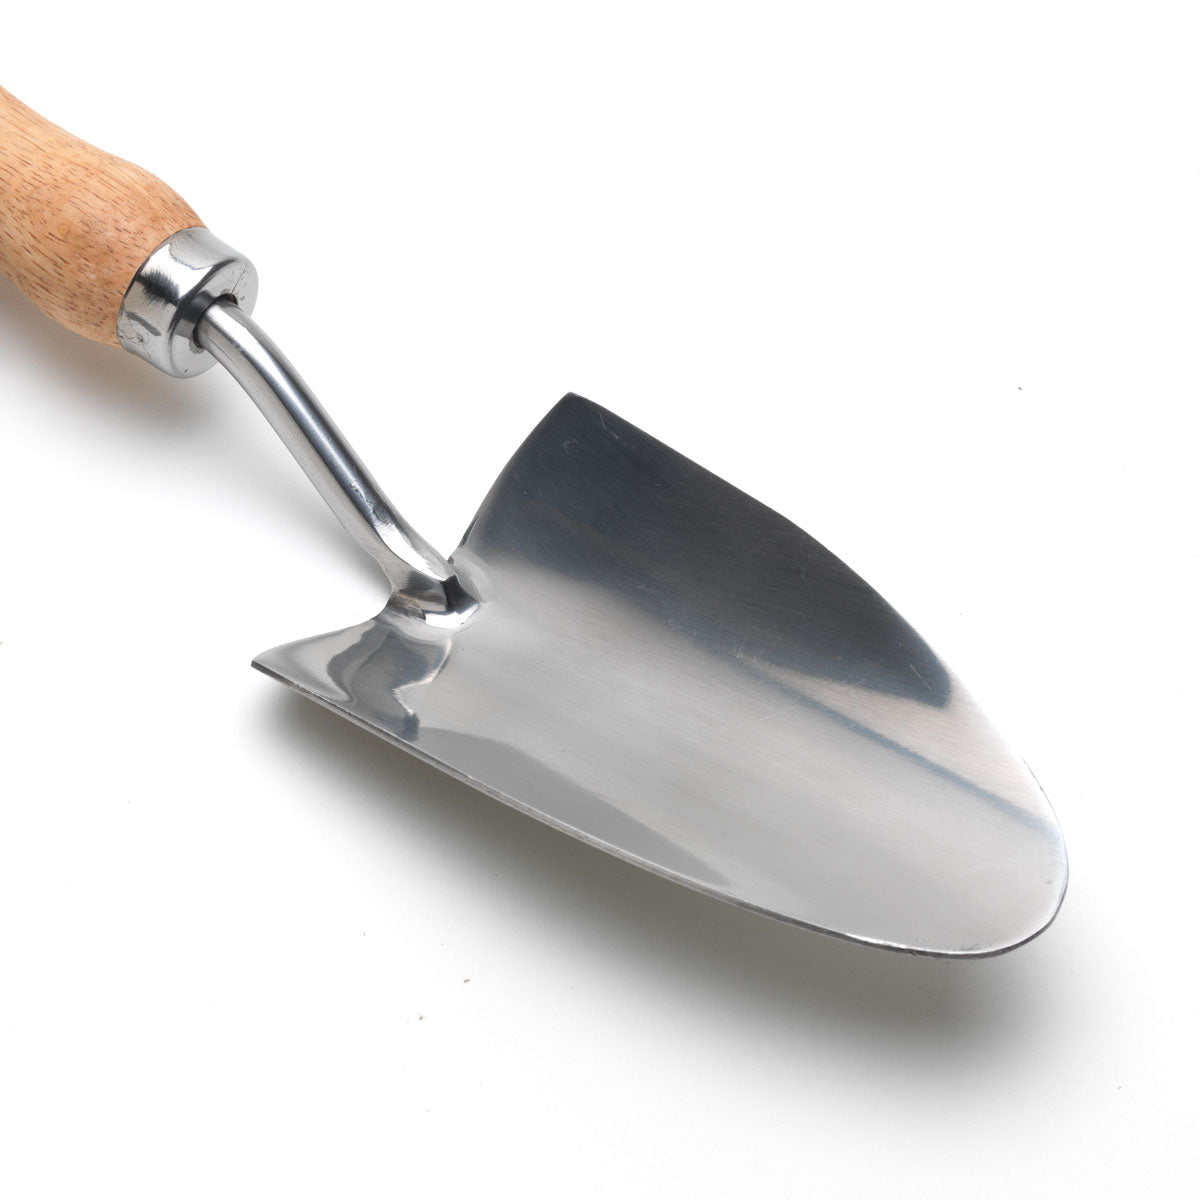 Close up of stainless steel garden hand trowel, with wooden handle, from Burgon & Ball.